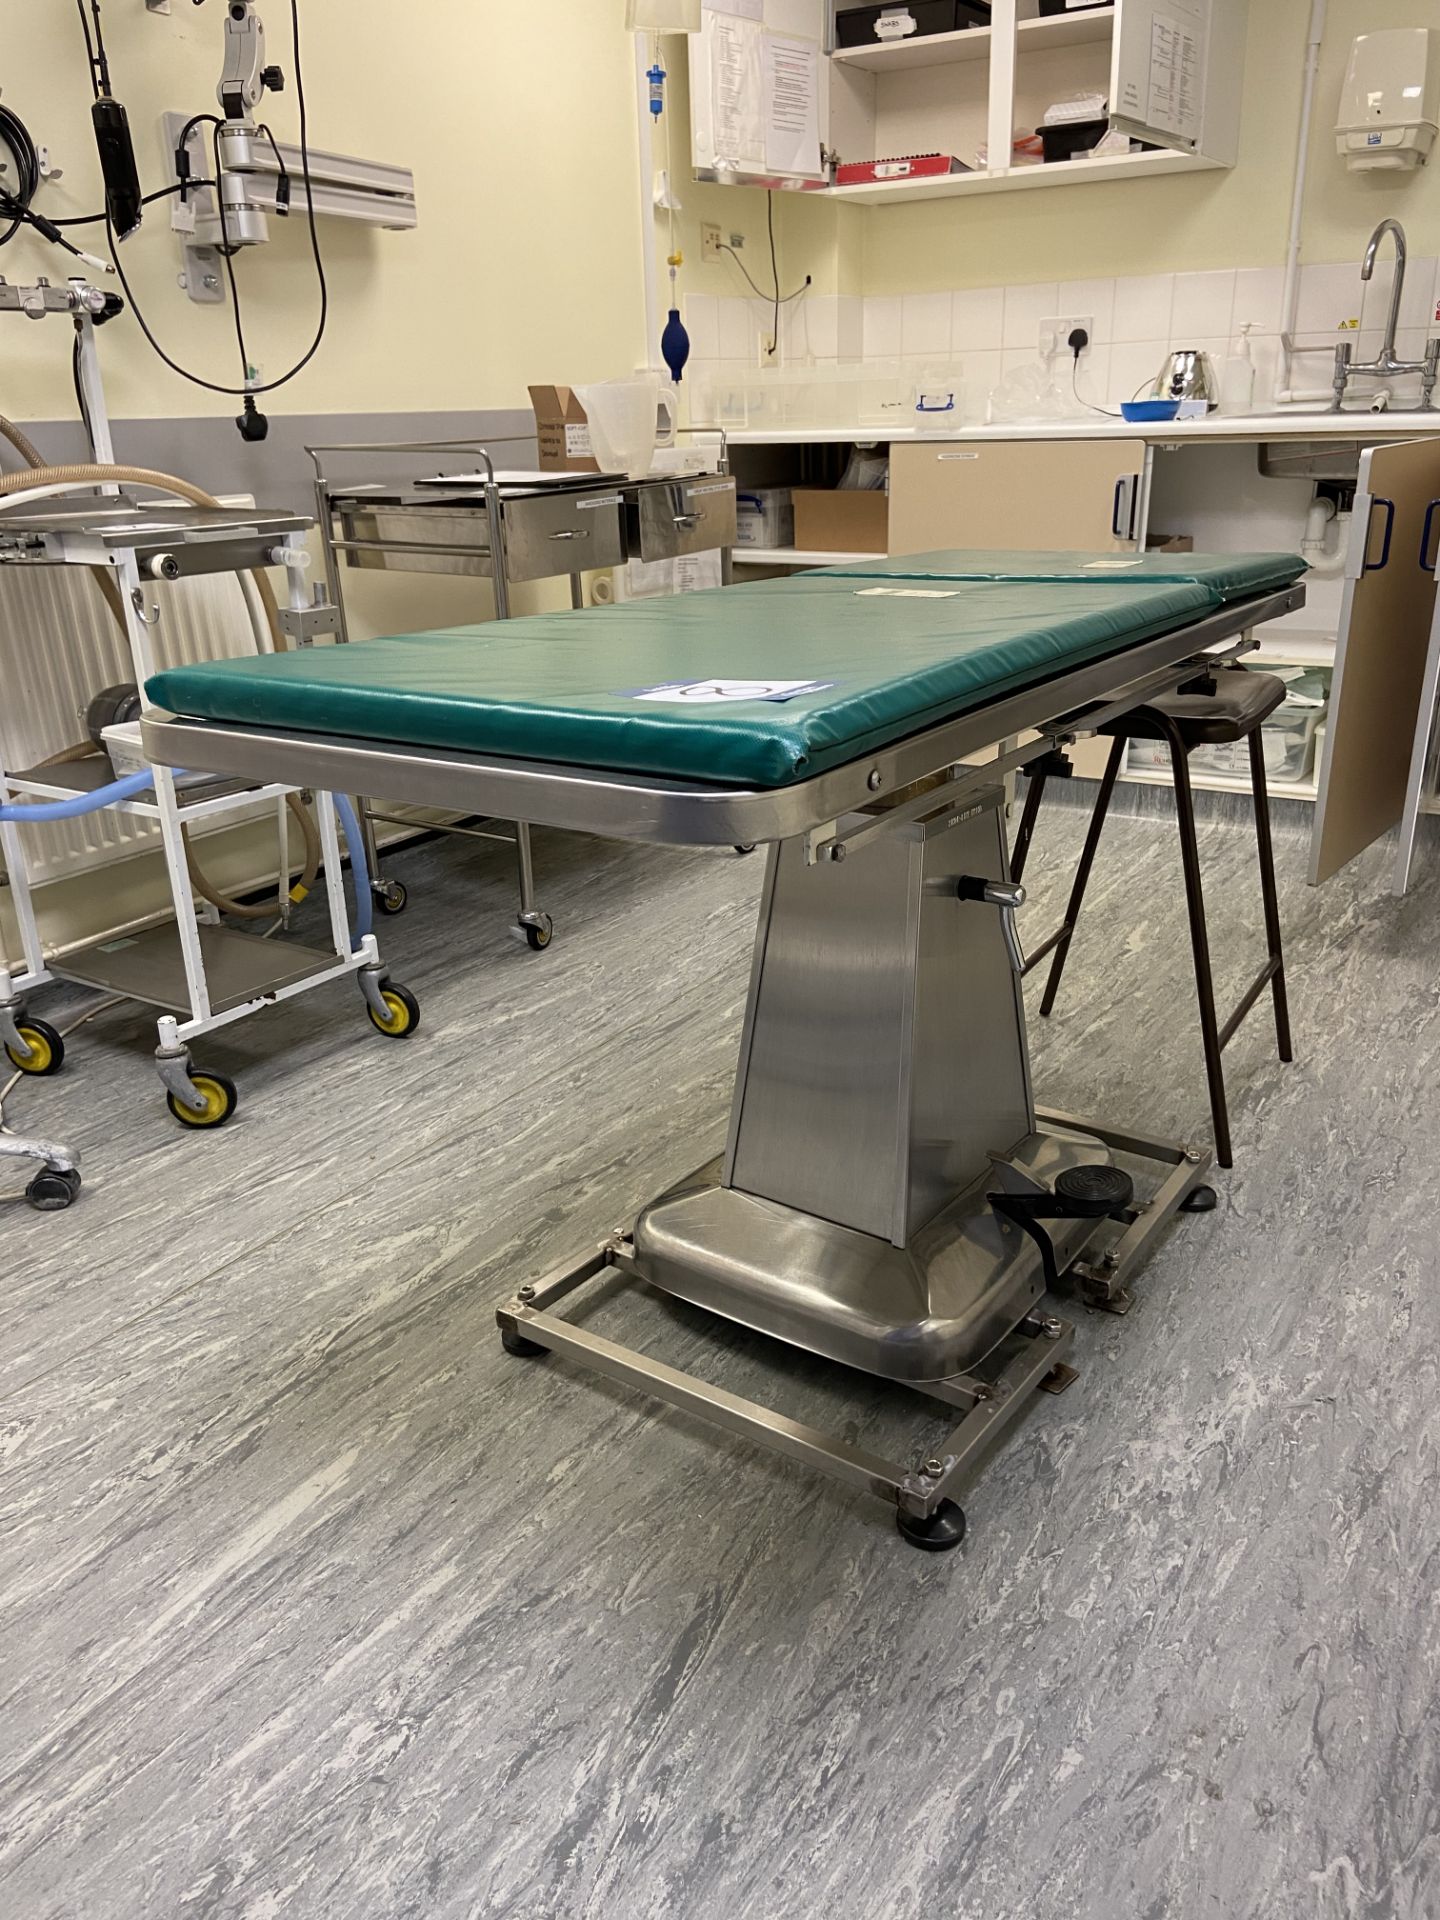 Contents of Minor Procedures Room including Shor-Line Kcmo stainless steel operating table with - Image 2 of 10